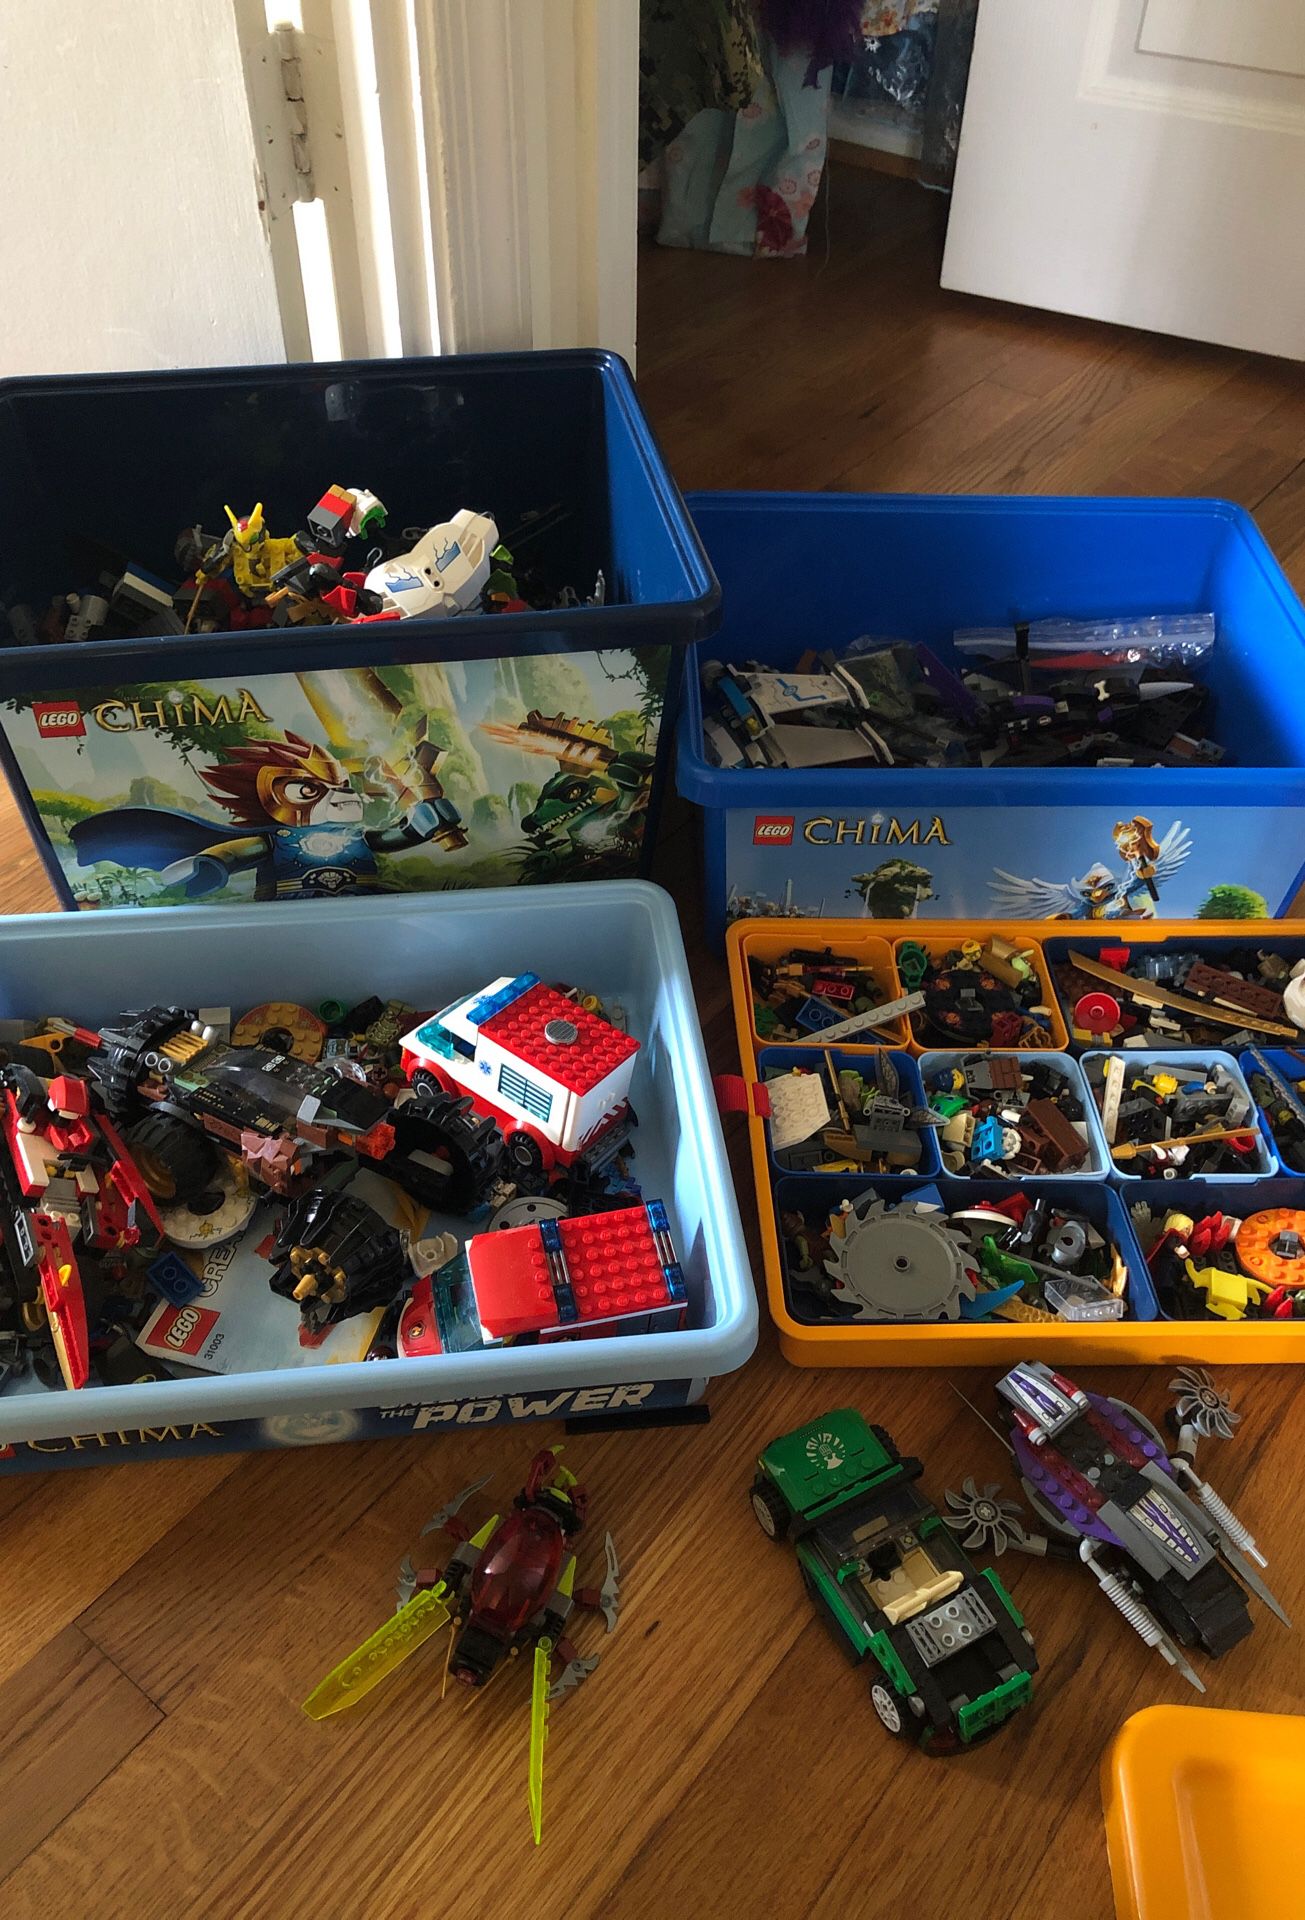 A lot of LEGO and LEGO storages